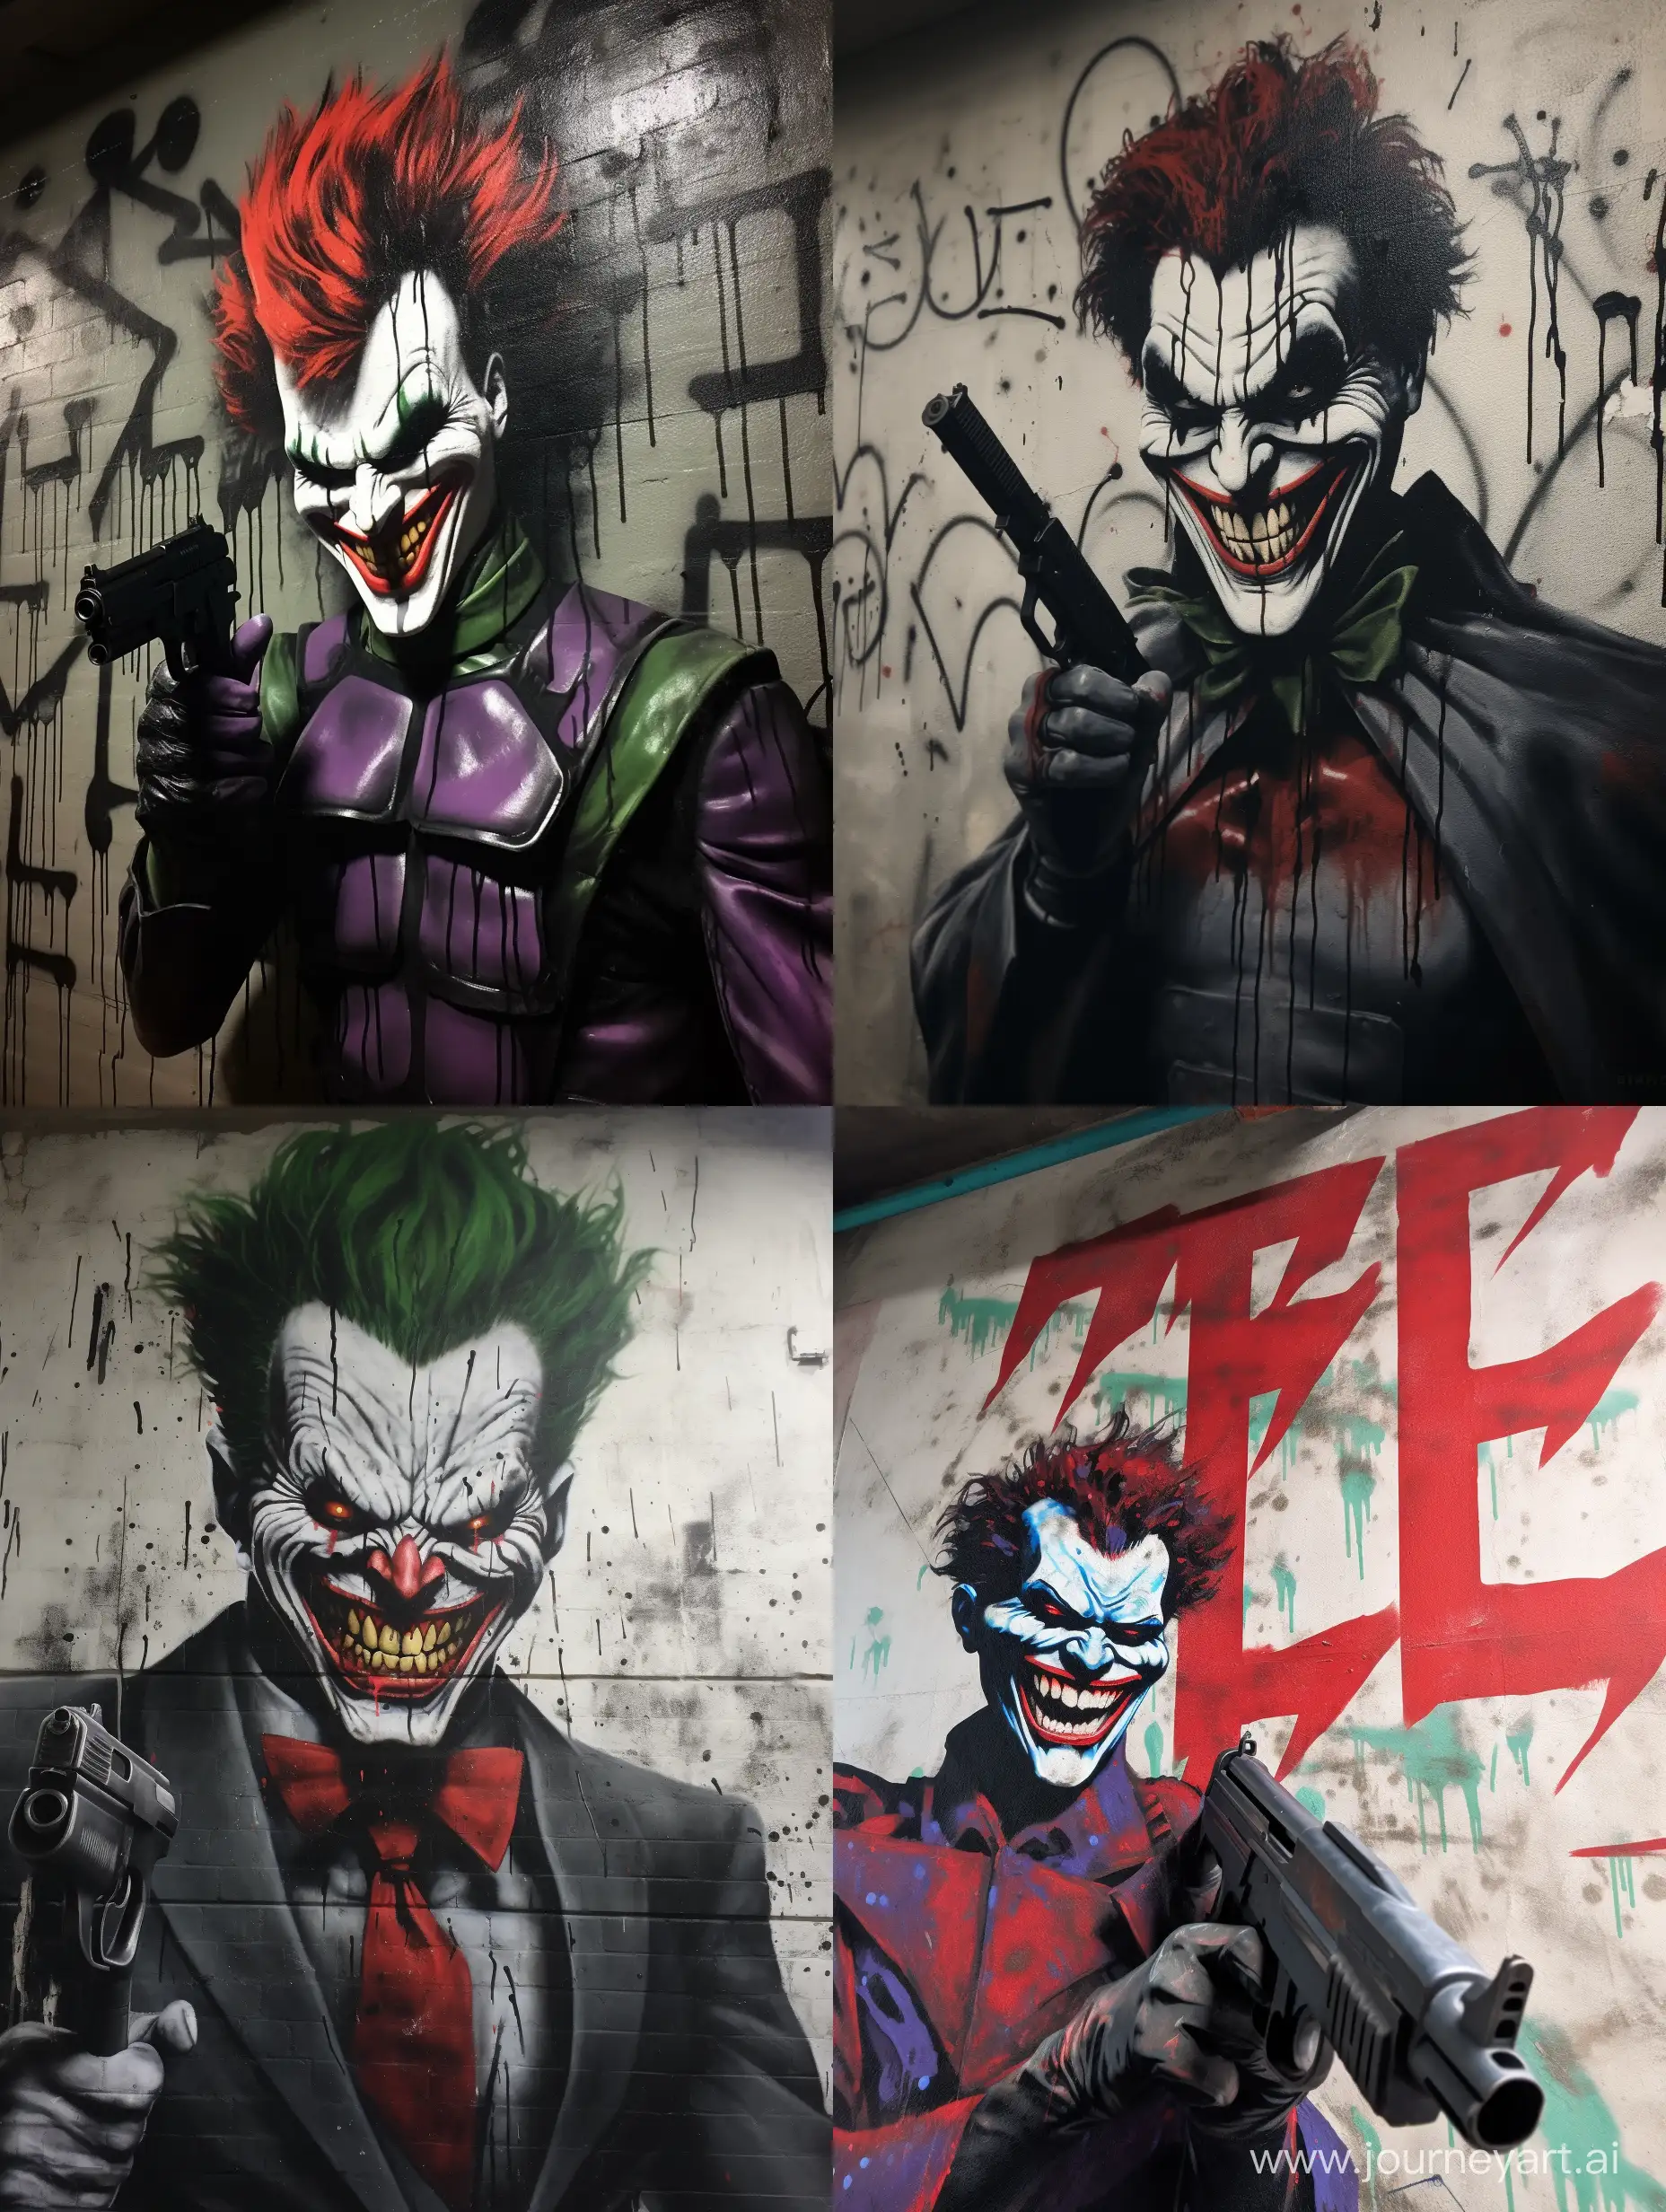 Joker-with-Wicked-Smile-and-Gun-Standing-Before-3ZF-Graffiti-Wall